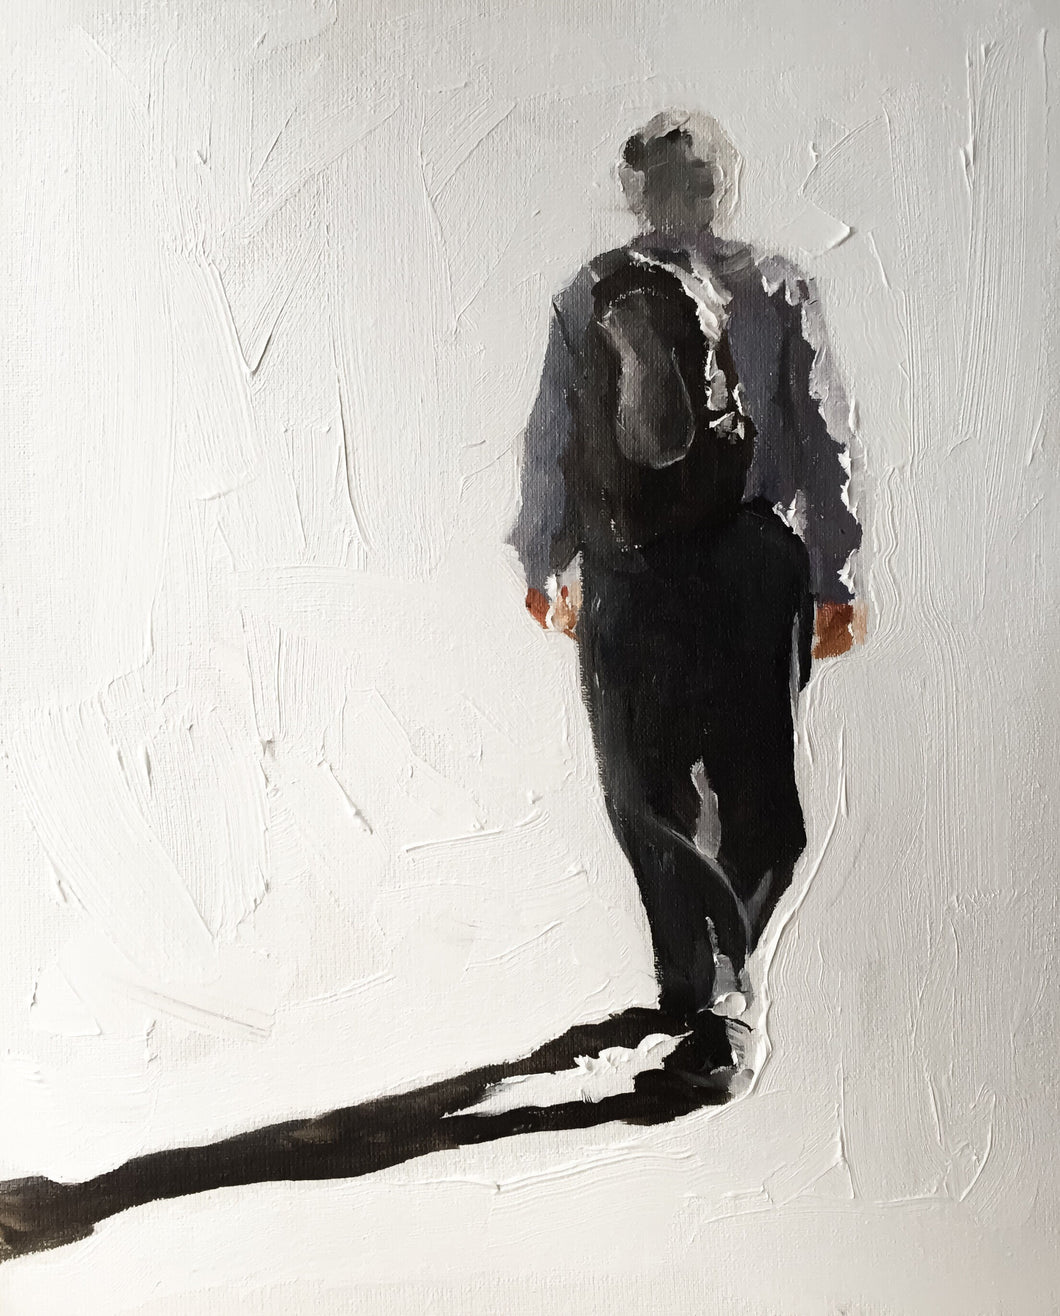 Man with backpack Painting, Prints, Canvas, Posters, Originals, Commissions,  Fine Art - from original oil painting by James Coates